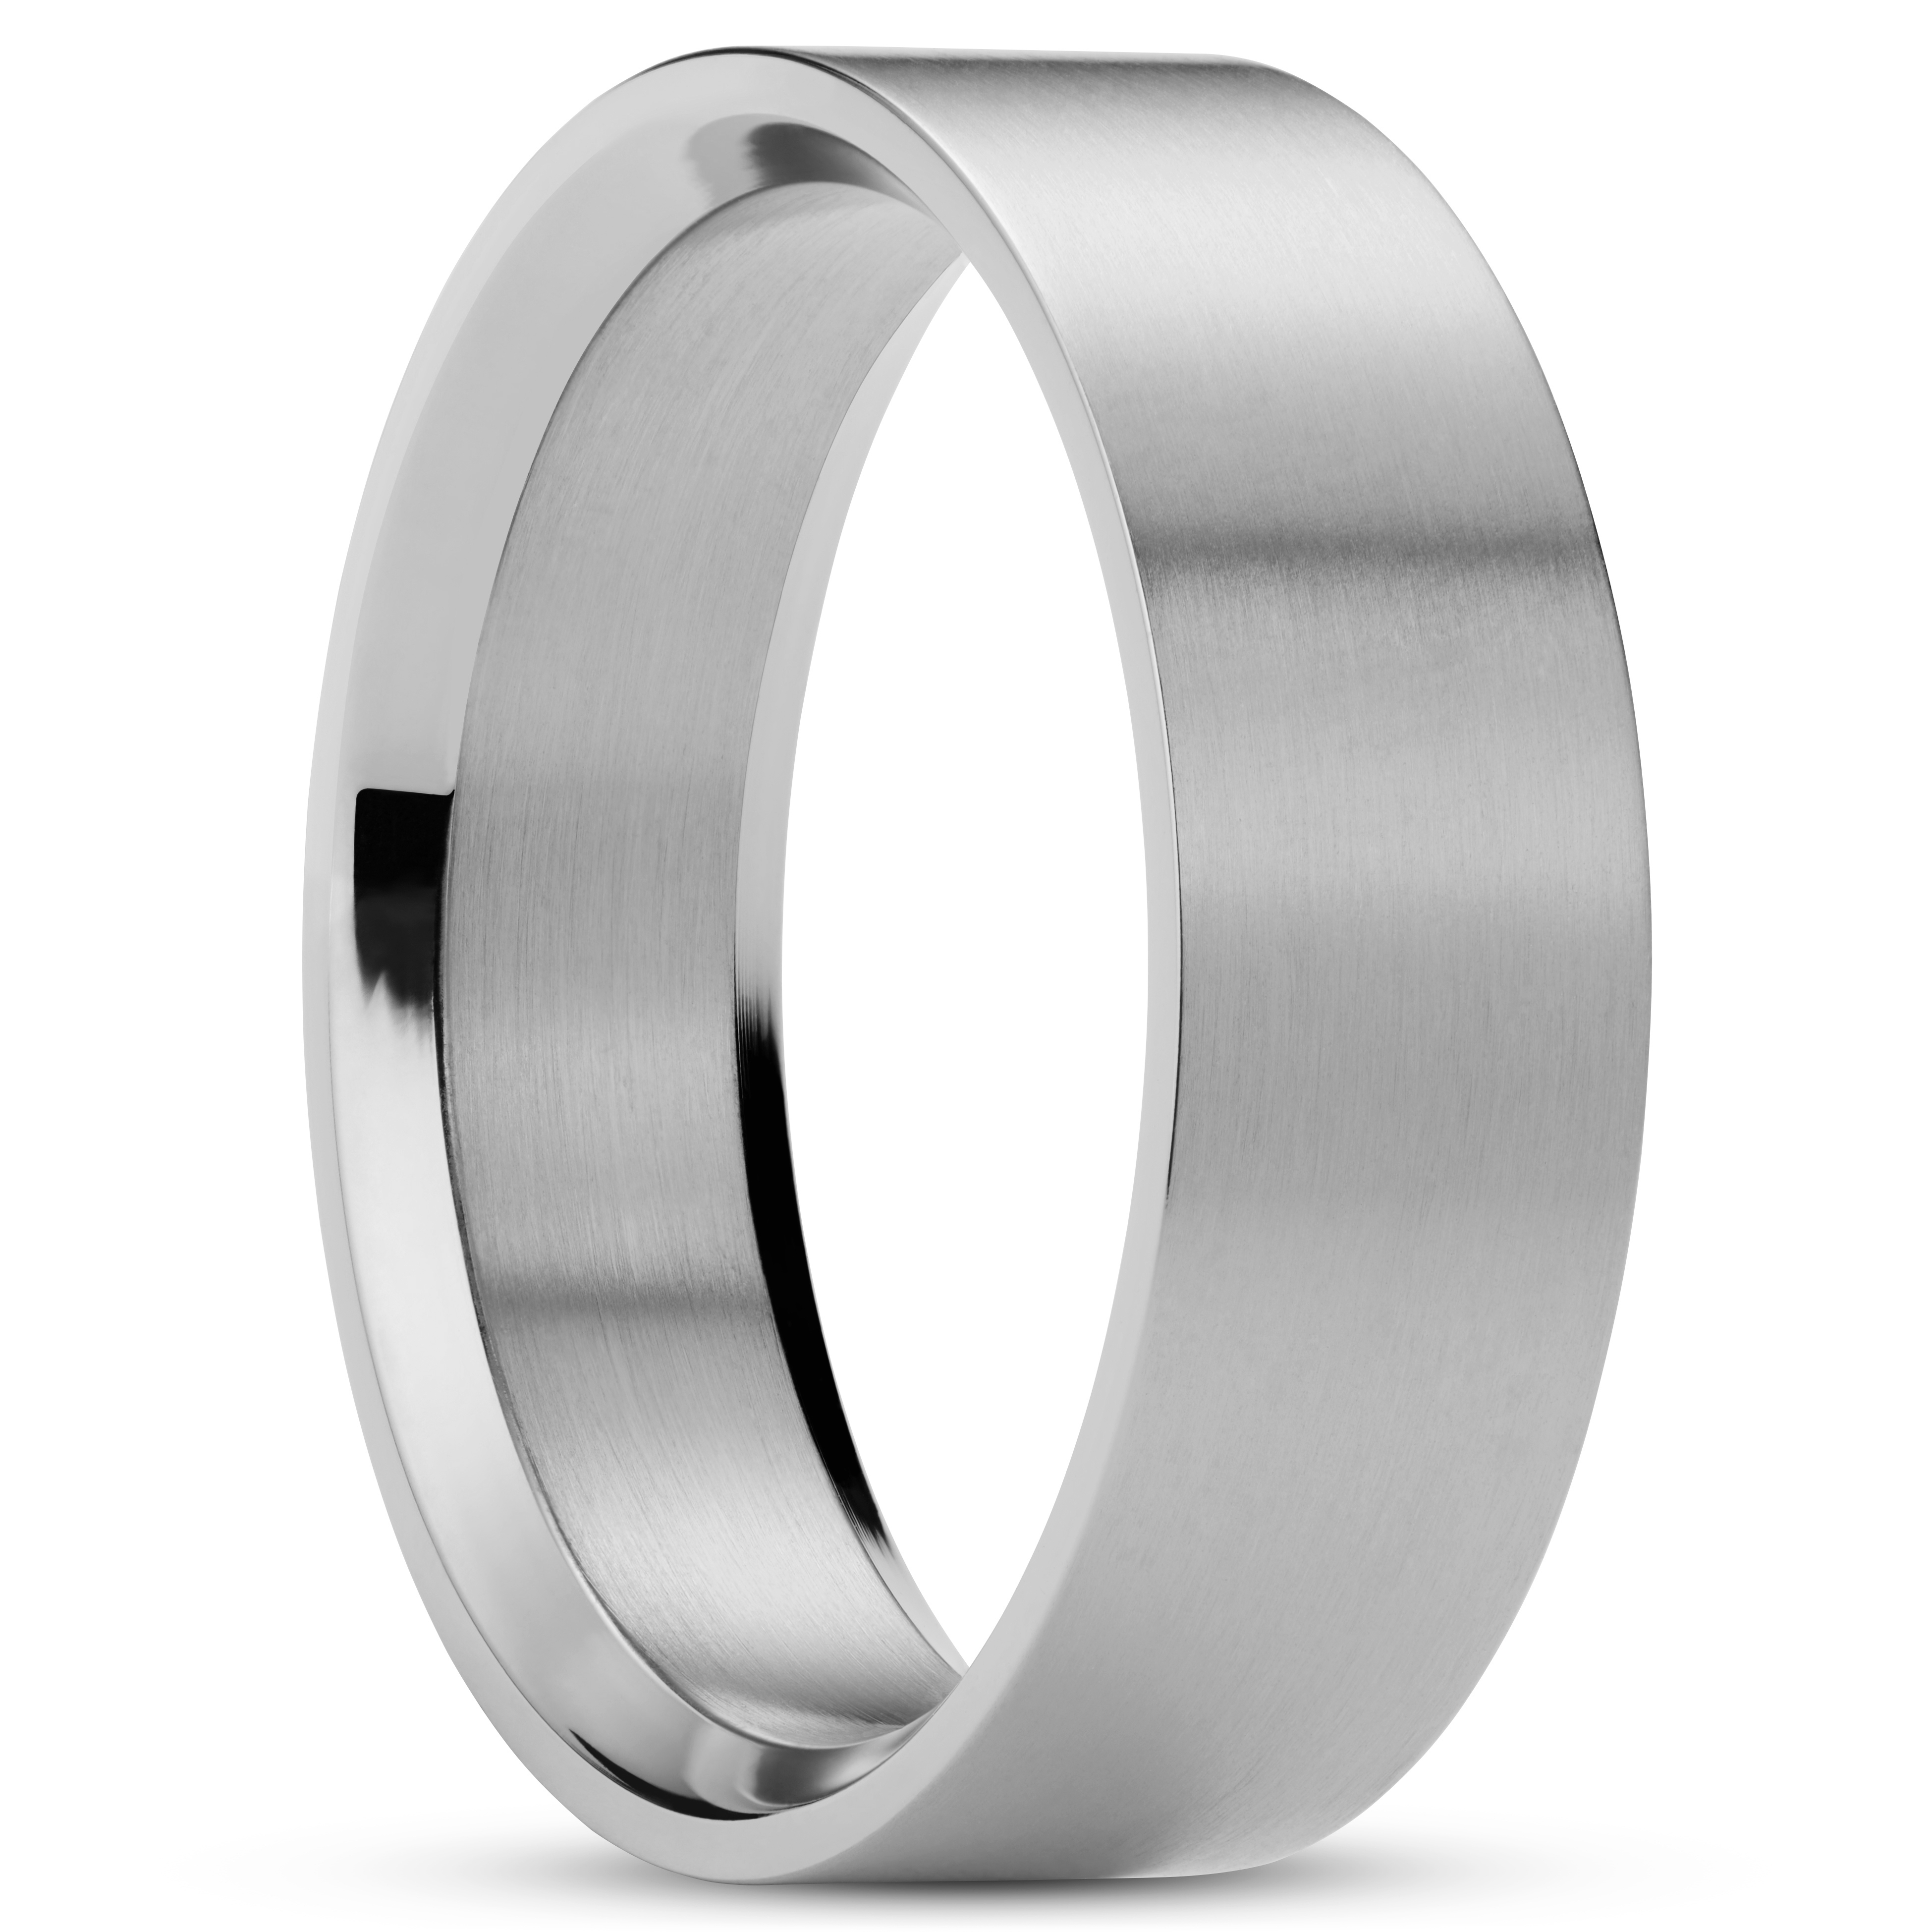 Black Stainless Steel Unisex Band Ring, 20 Gram, Mix at Rs 50 in Jaipur